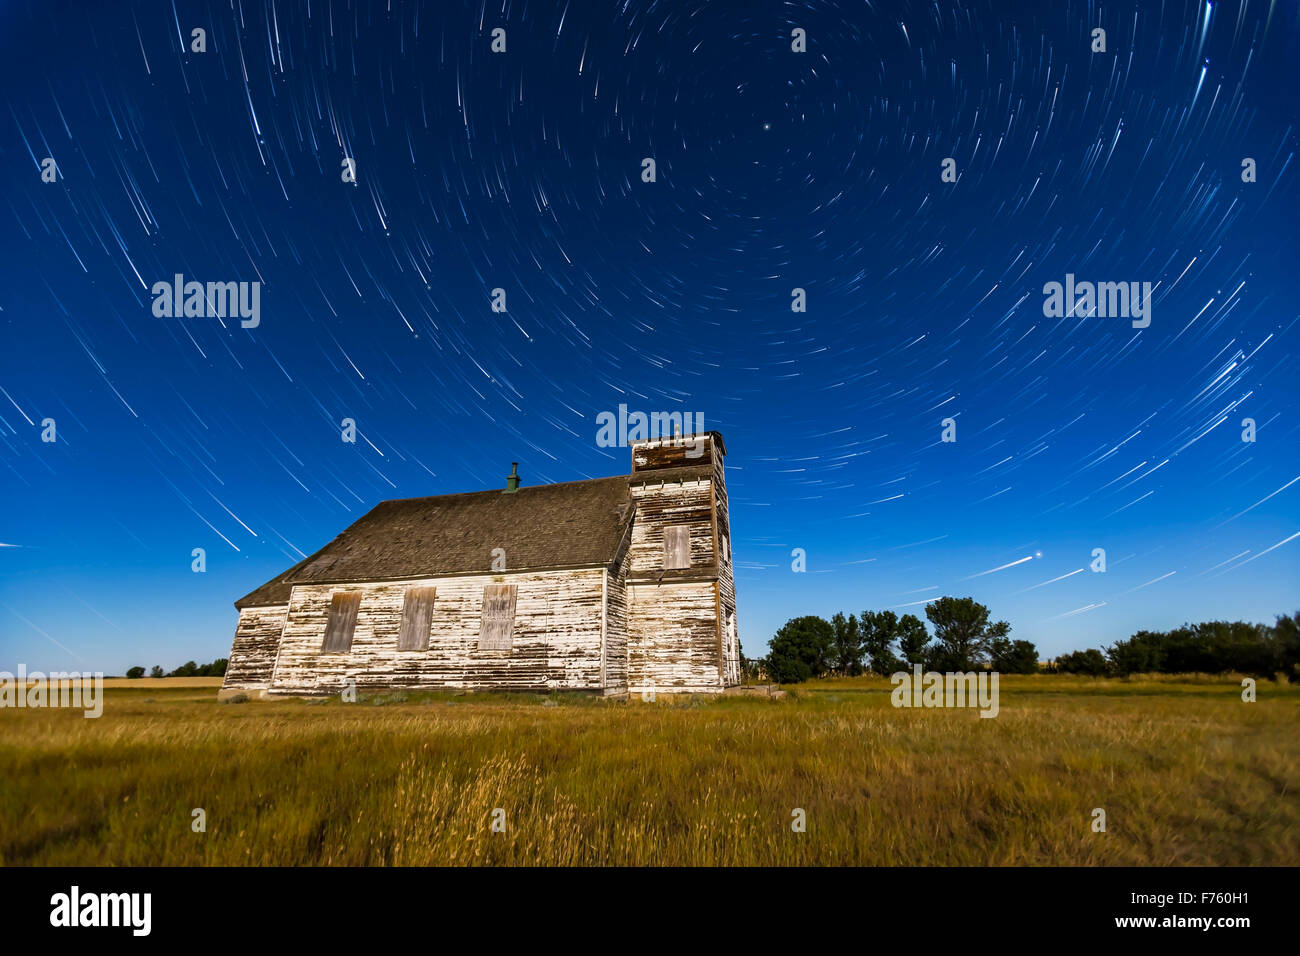 Circumpolar star trails over the historic but sadly neglected St. Anthony’s Church between Bow Island and Etzikom, Alberta. The Stock Photo